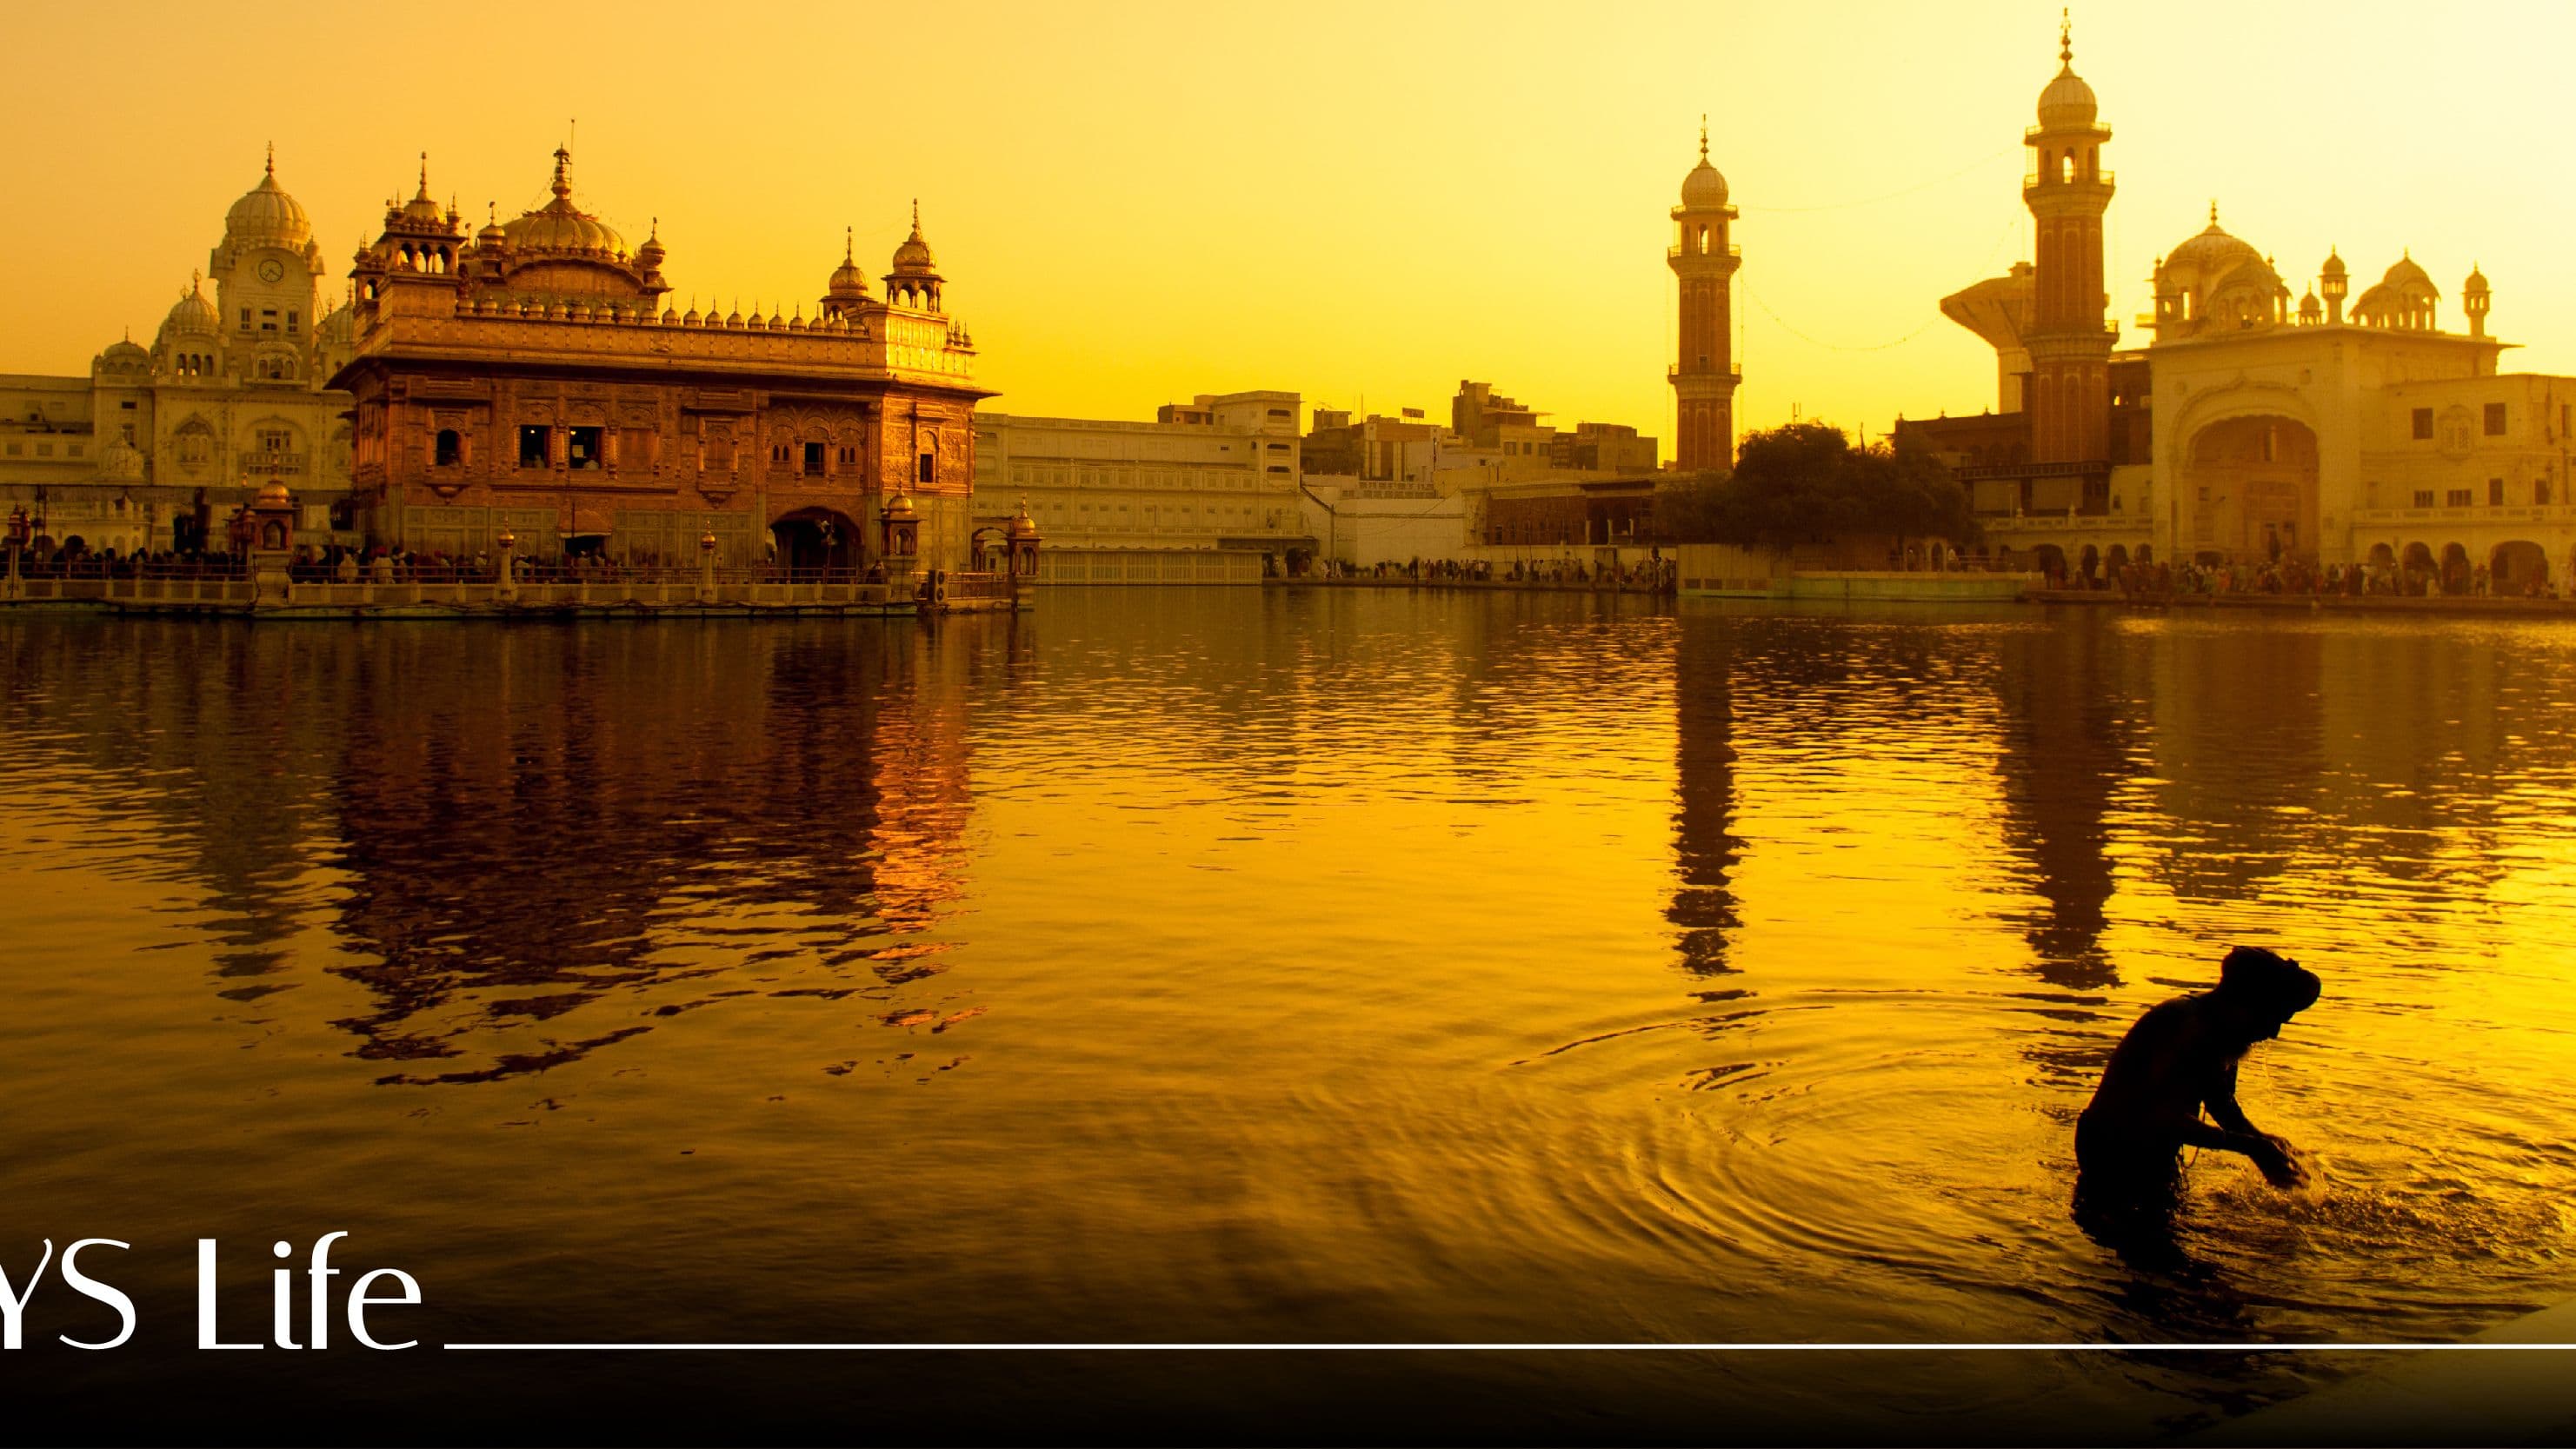 Amritsar: The city that’s made selfless service its calling card 